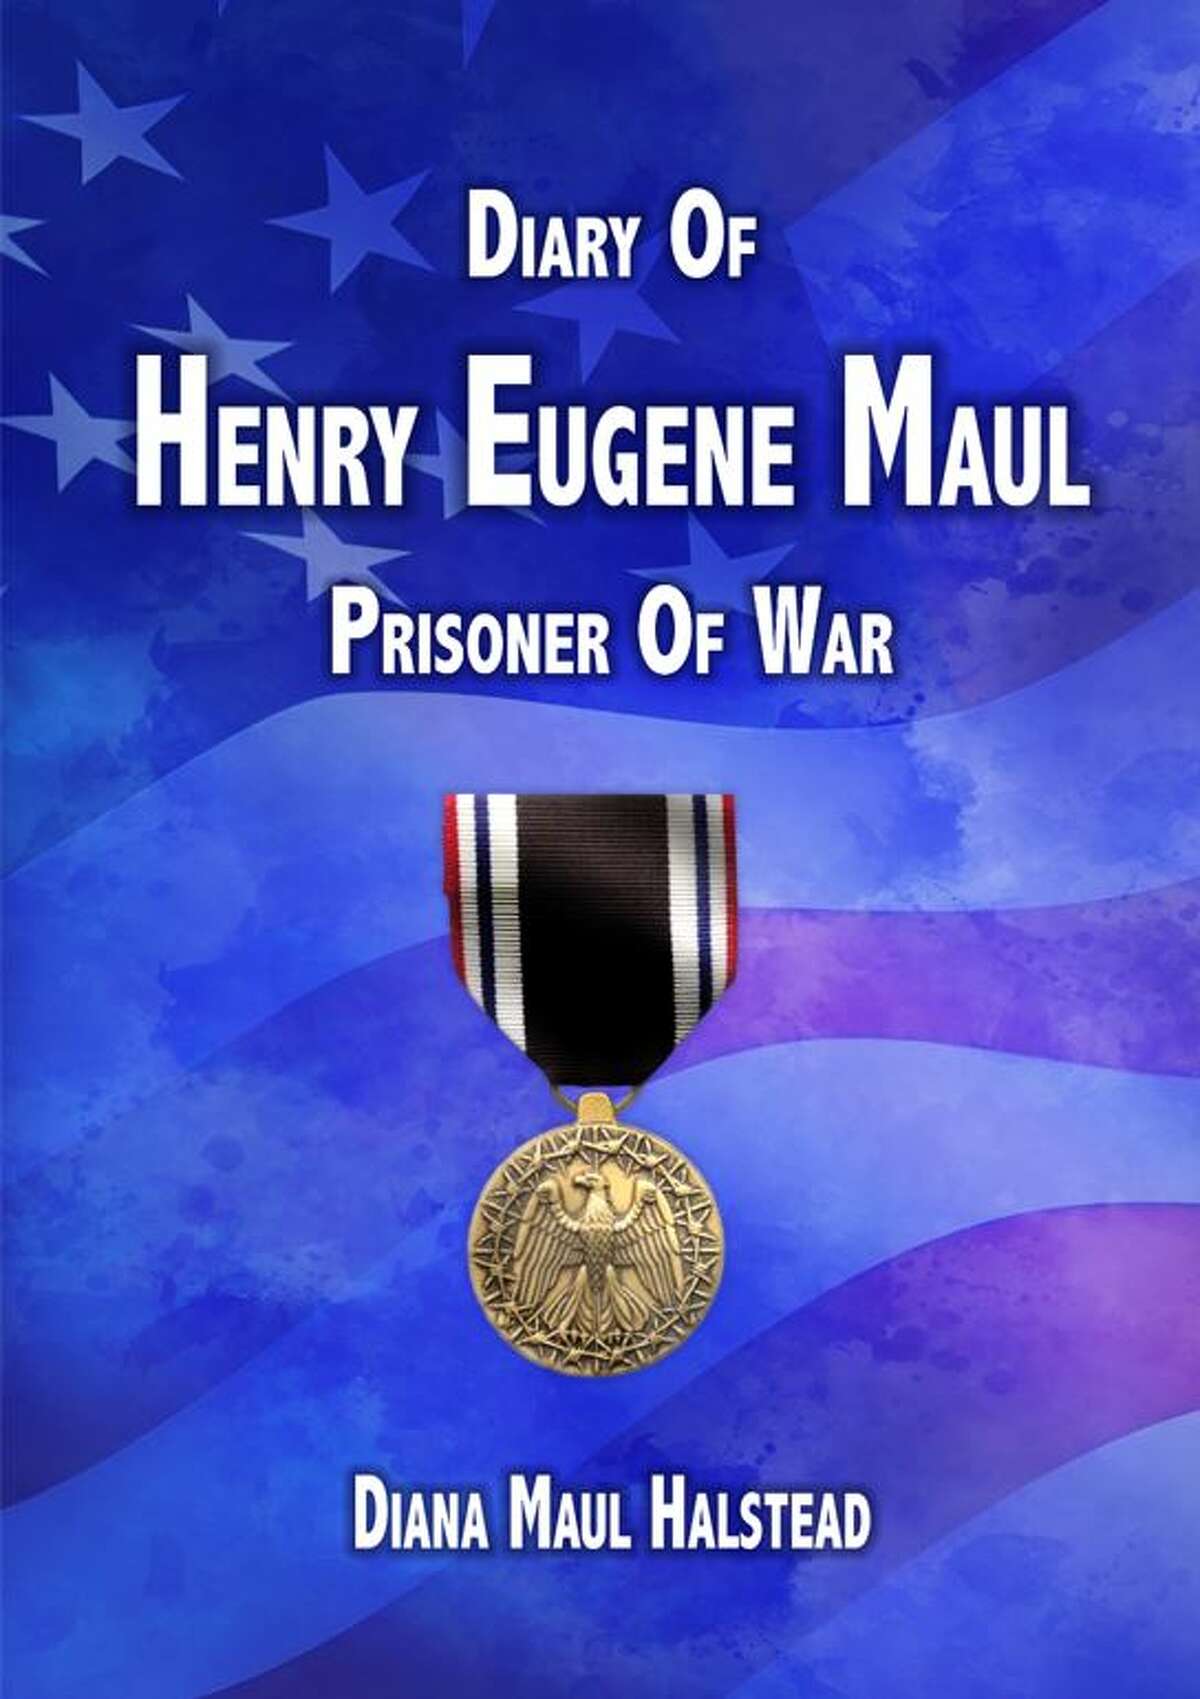 The Diary of Henry Eugene Maul, Prisoner of War is a compilation of drawings, poems and notes by Alton World War II POWs.